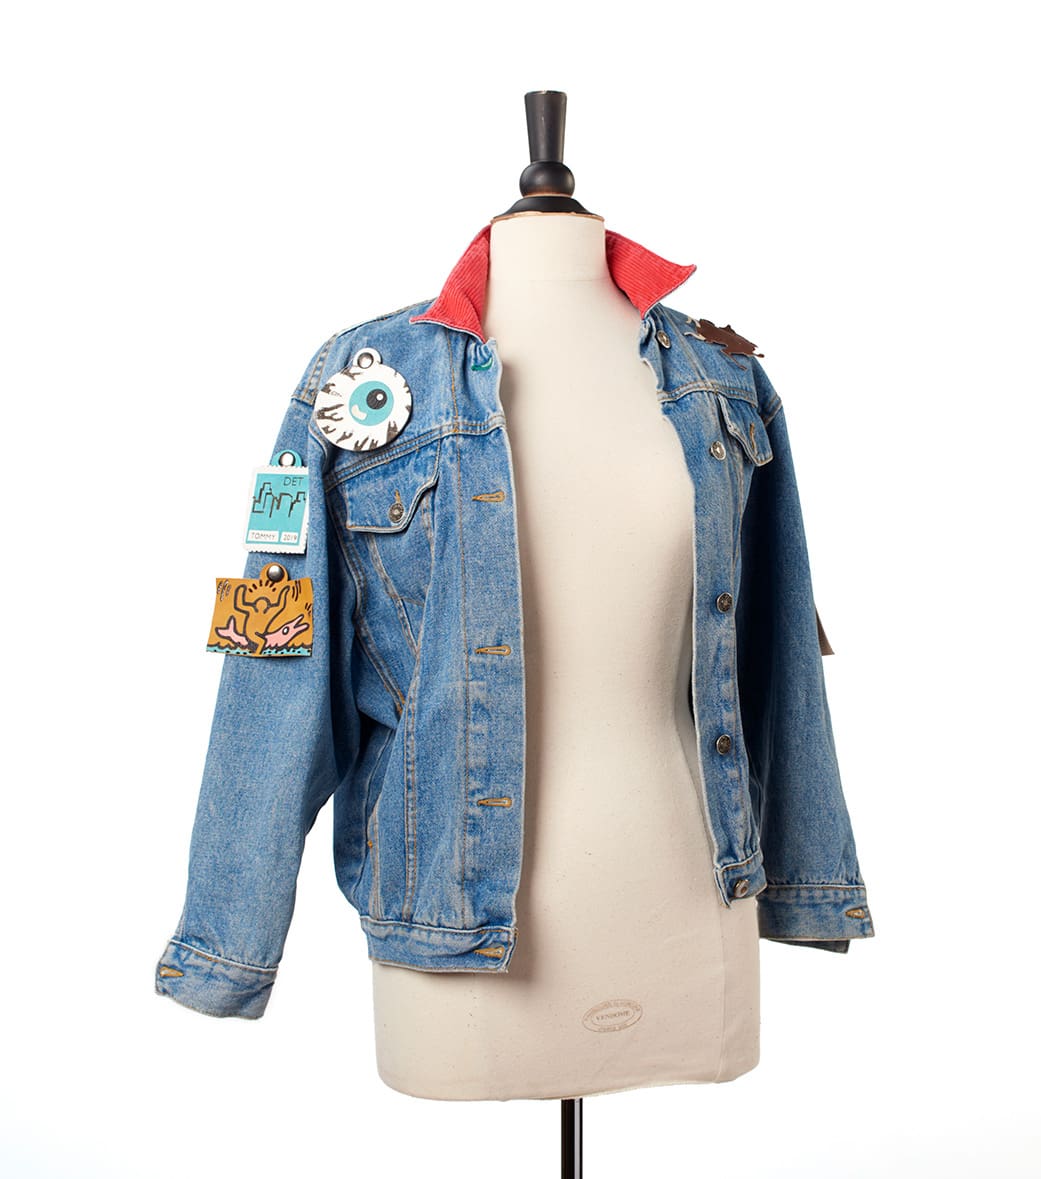 Denim jacket with leather patches